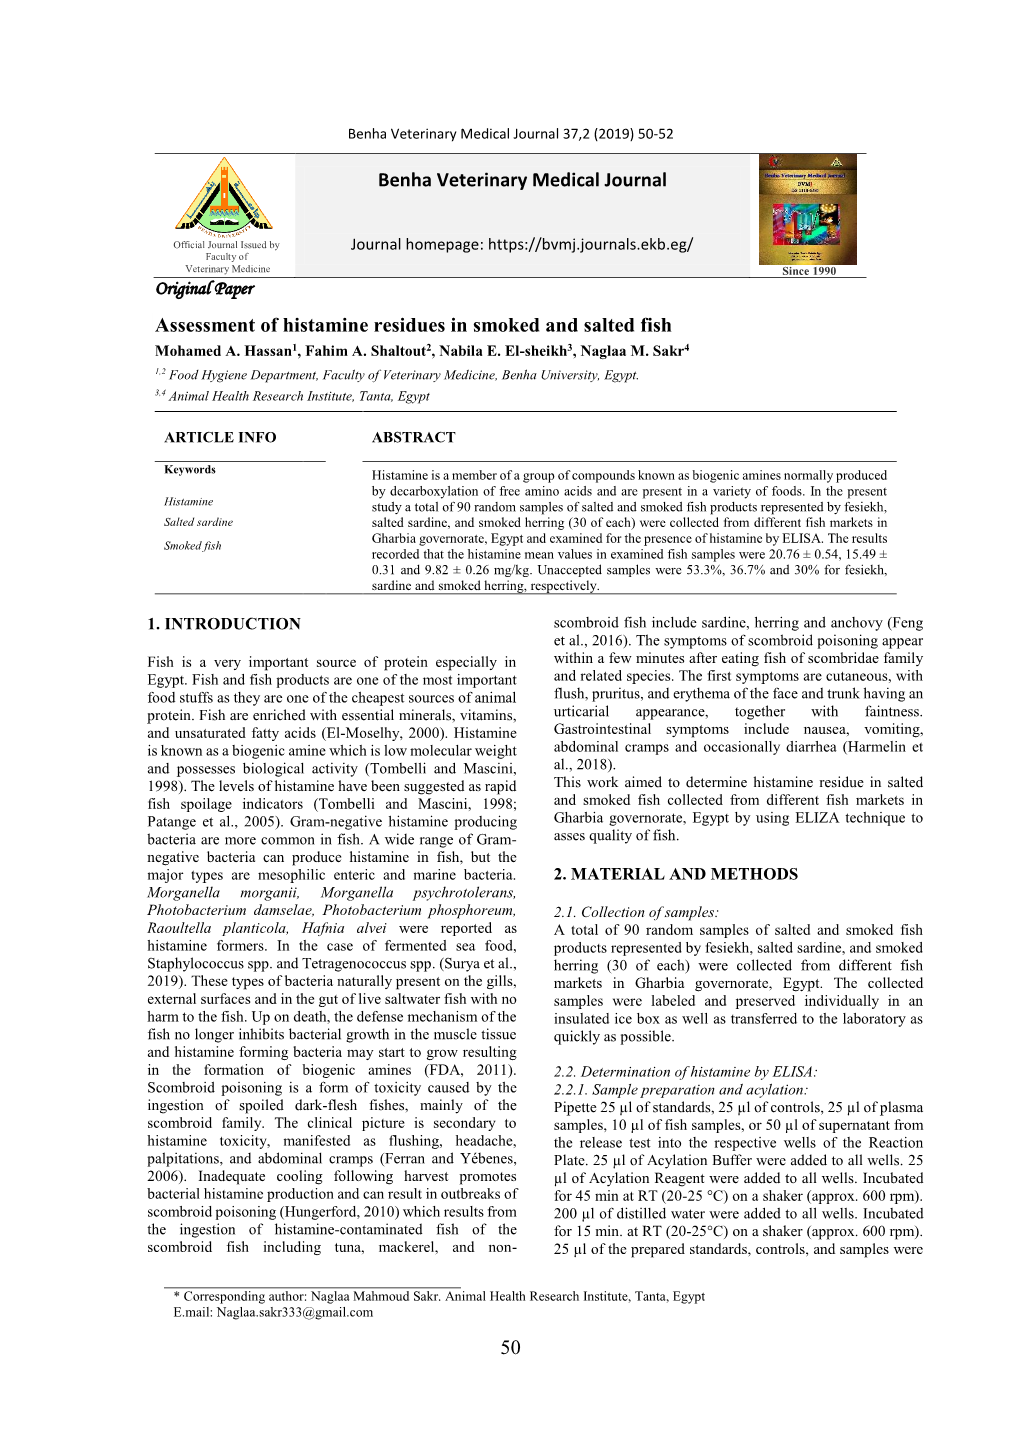 50 Benha Veterinary Medical Journal Assessment of Histamine Residues in Smoked and Salted Fish